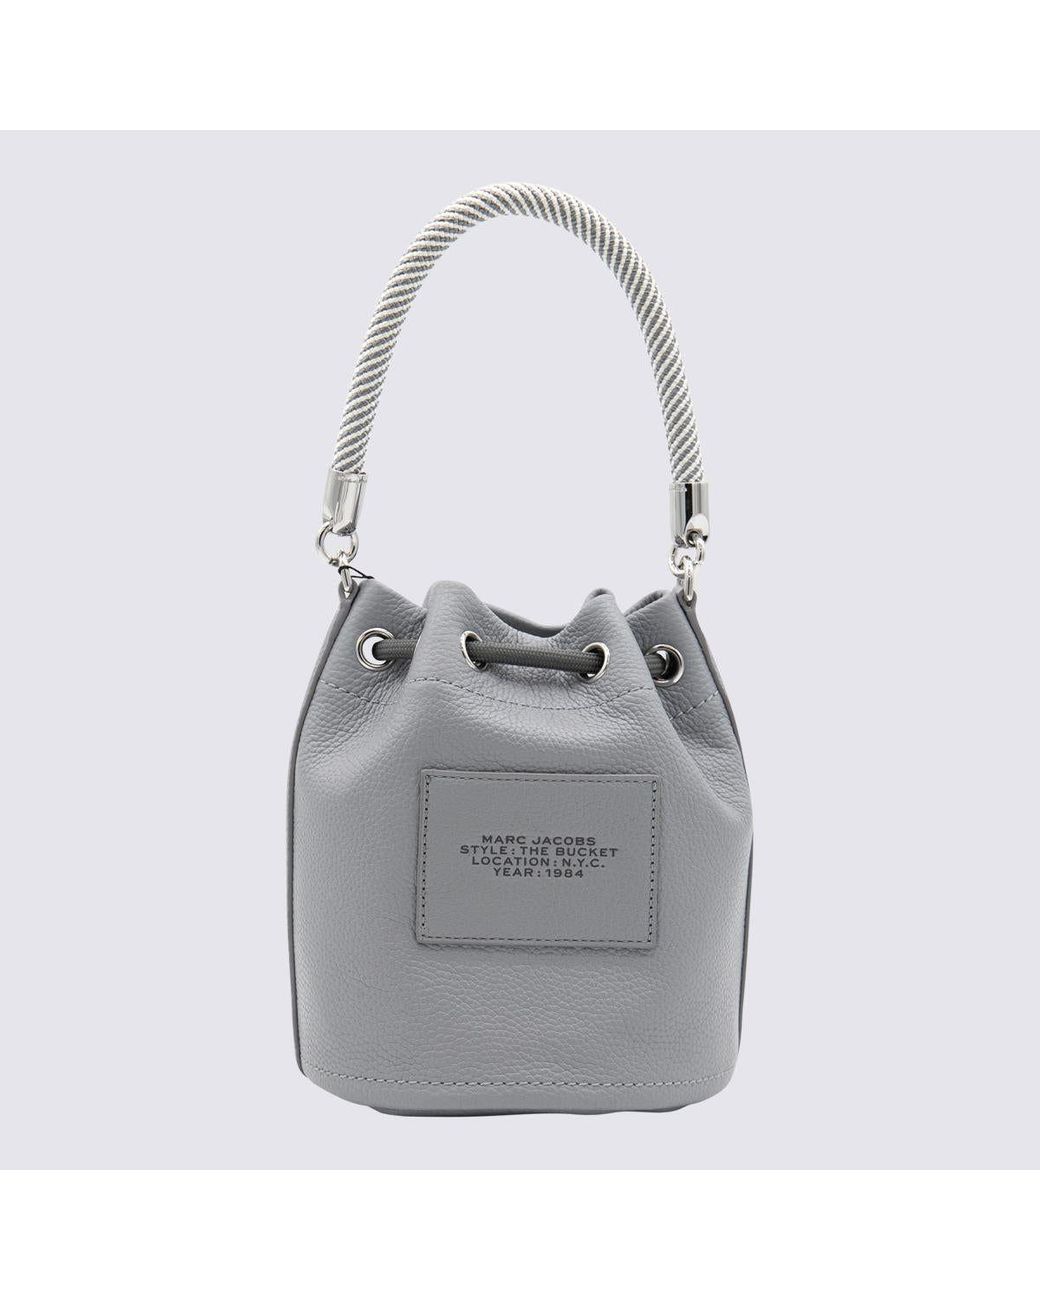 Marc Jacobs The Leather Bucket Bag Wolf Grey